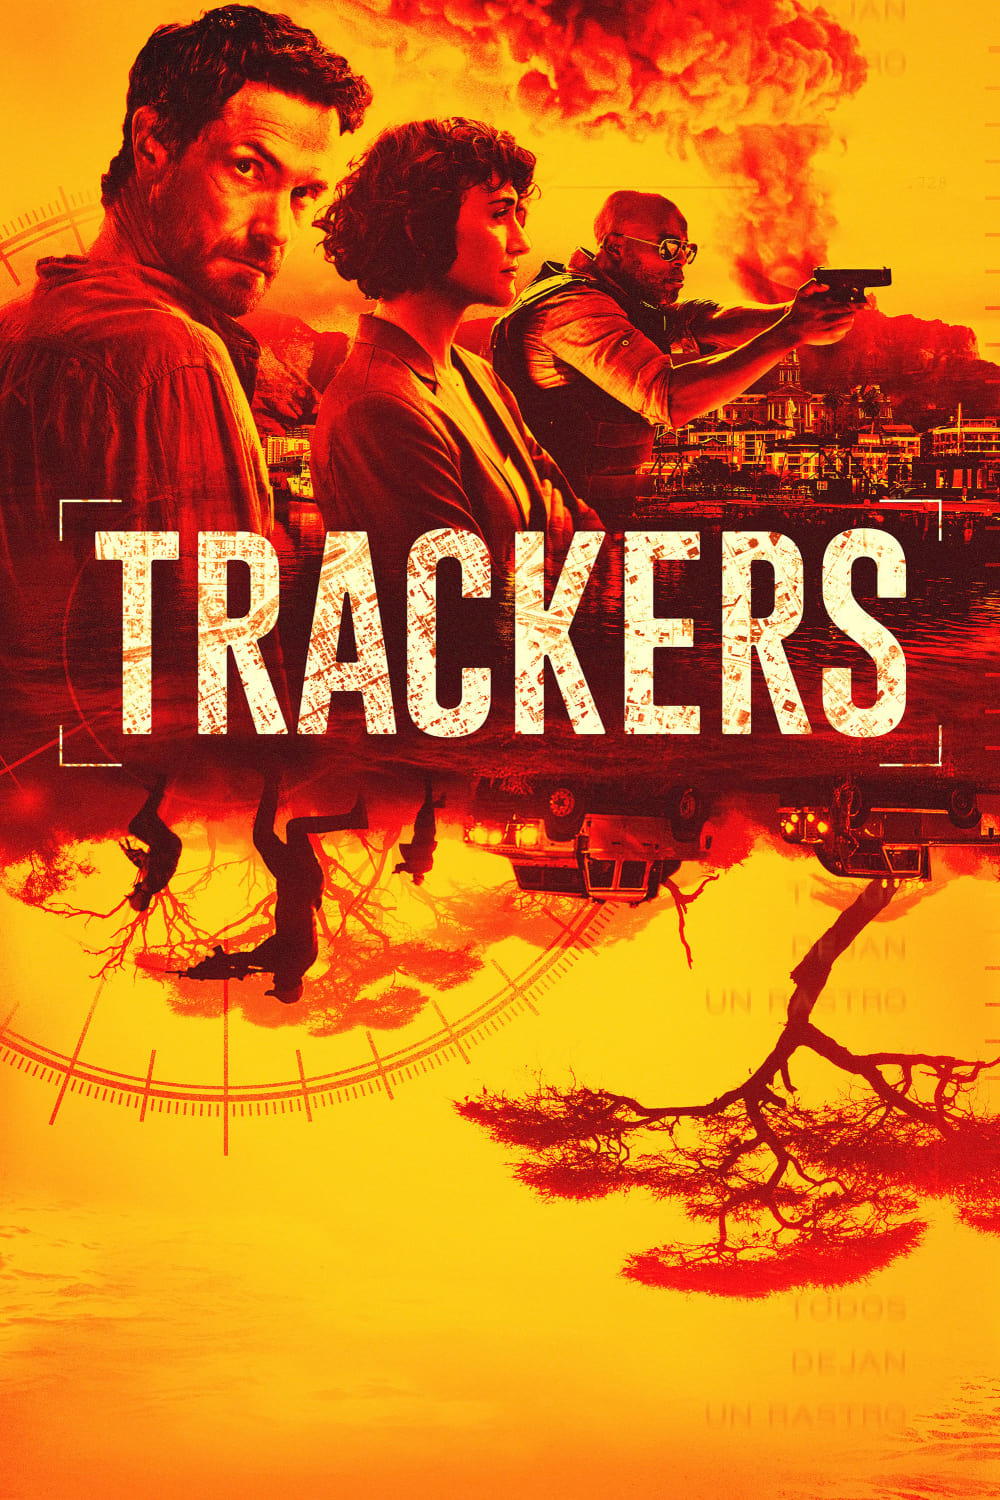 Trackers TV Shows About Africa